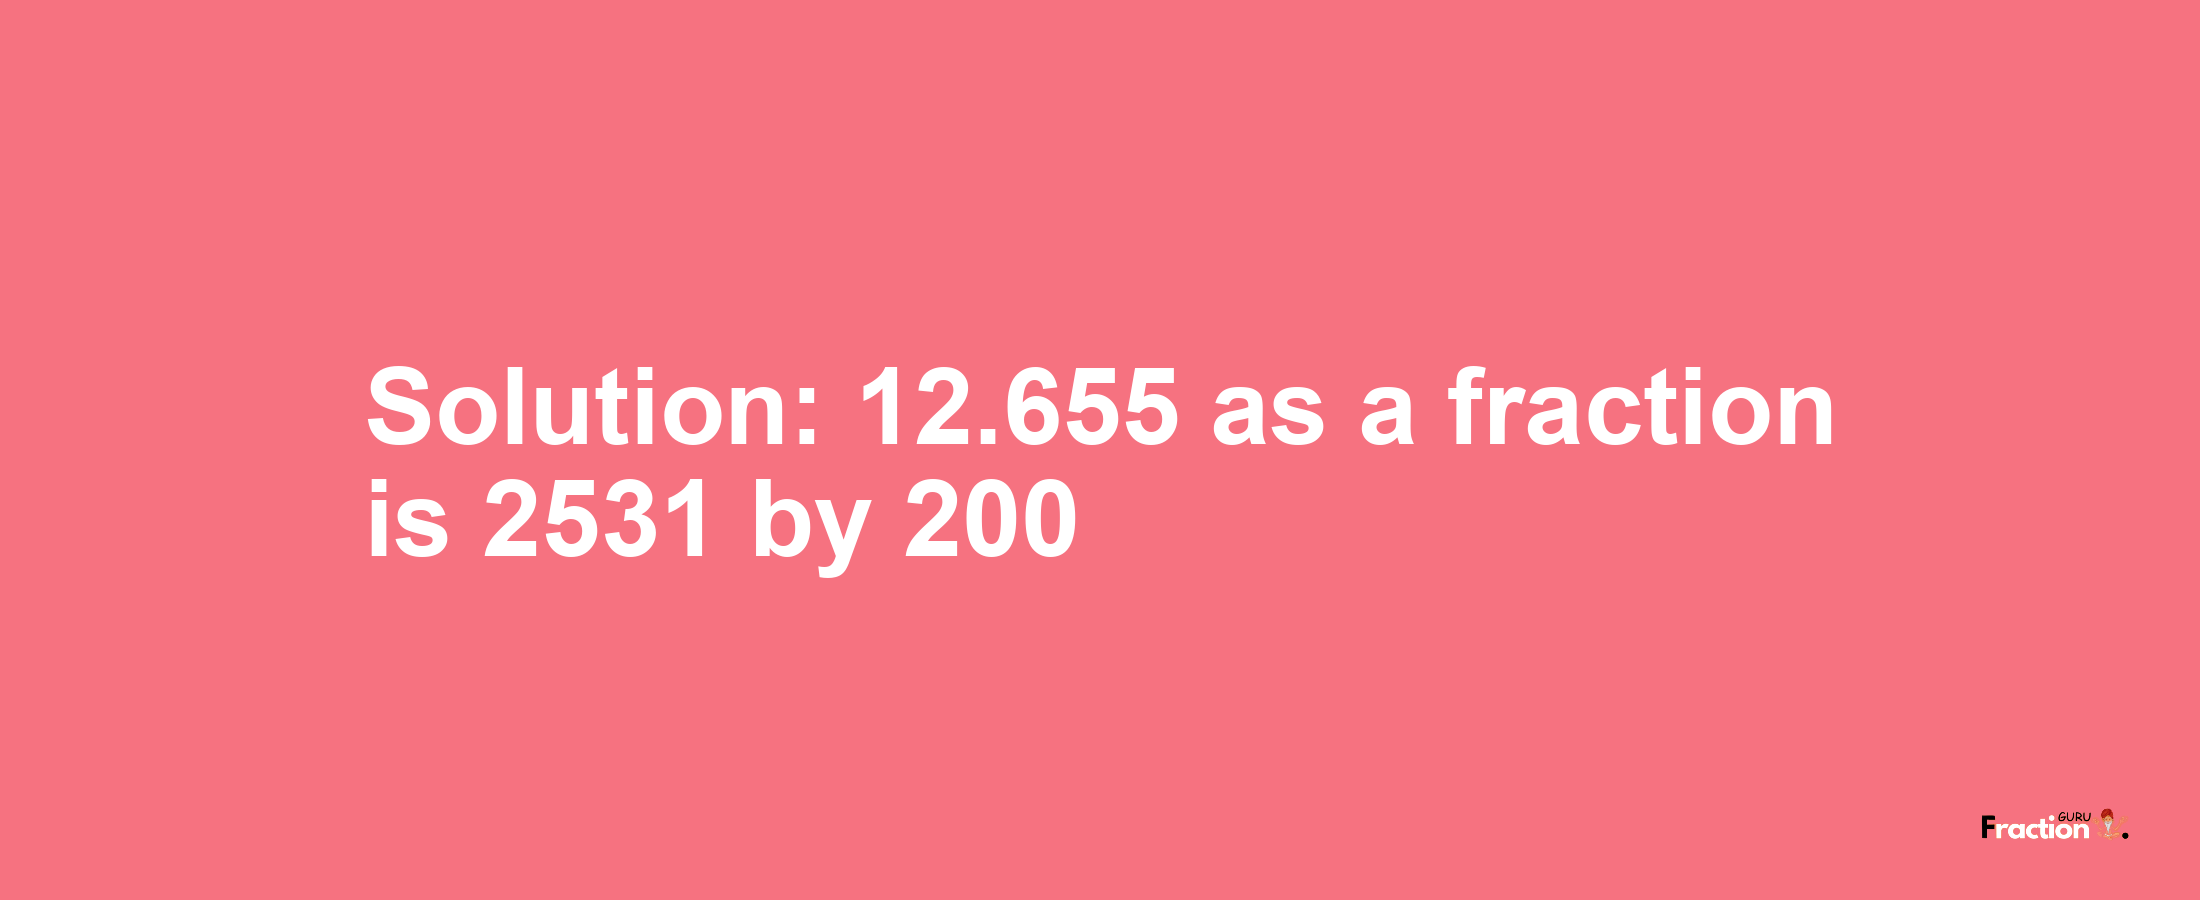 Solution:12.655 as a fraction is 2531/200